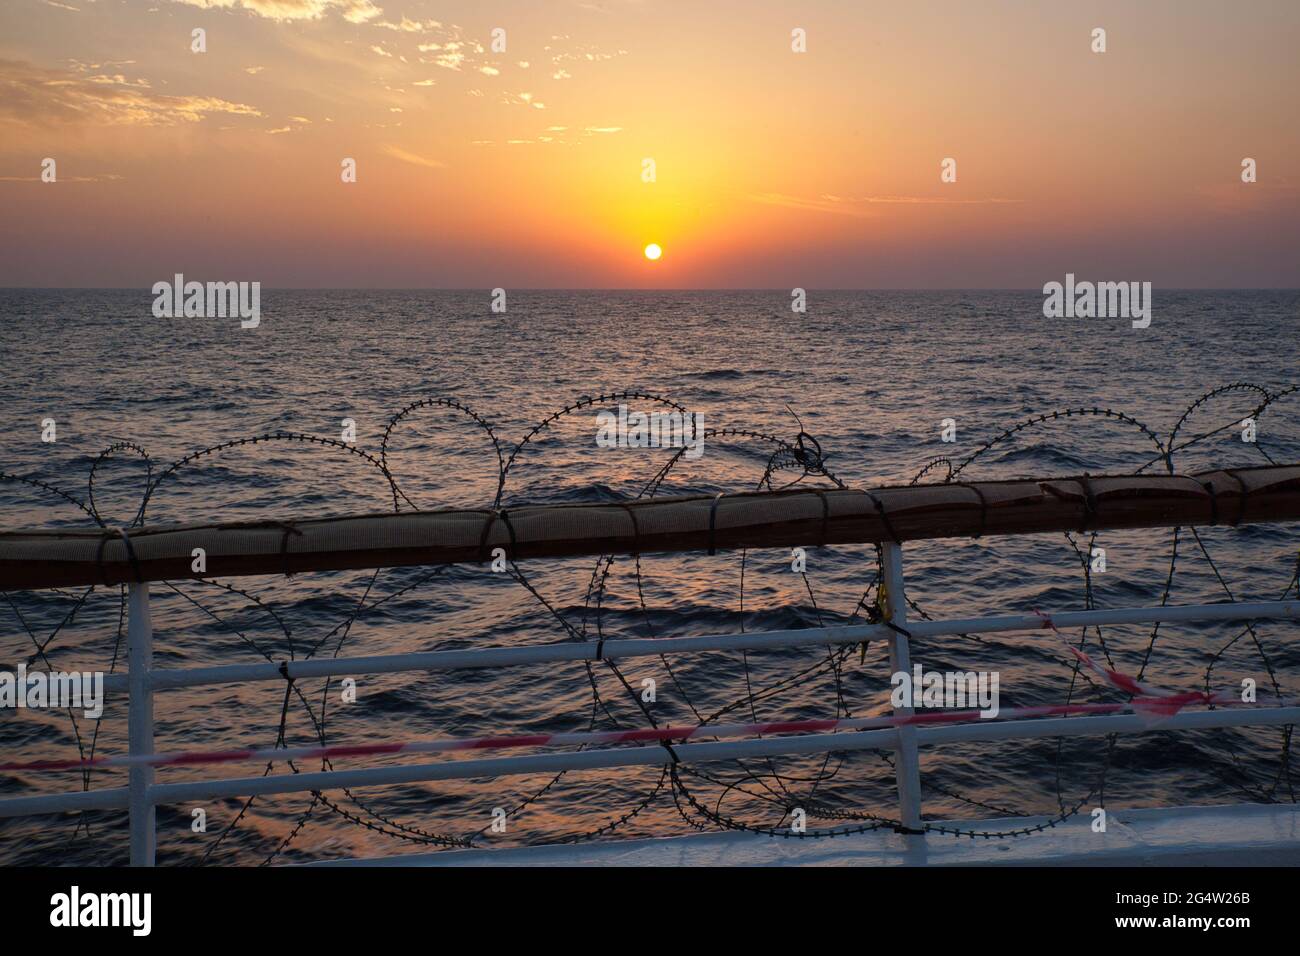 Sunset over the Indian Ocean from stern of a ship with the railing wound with razor wire in case of attack by pirates or terrorists to stop boarding Stock Photo